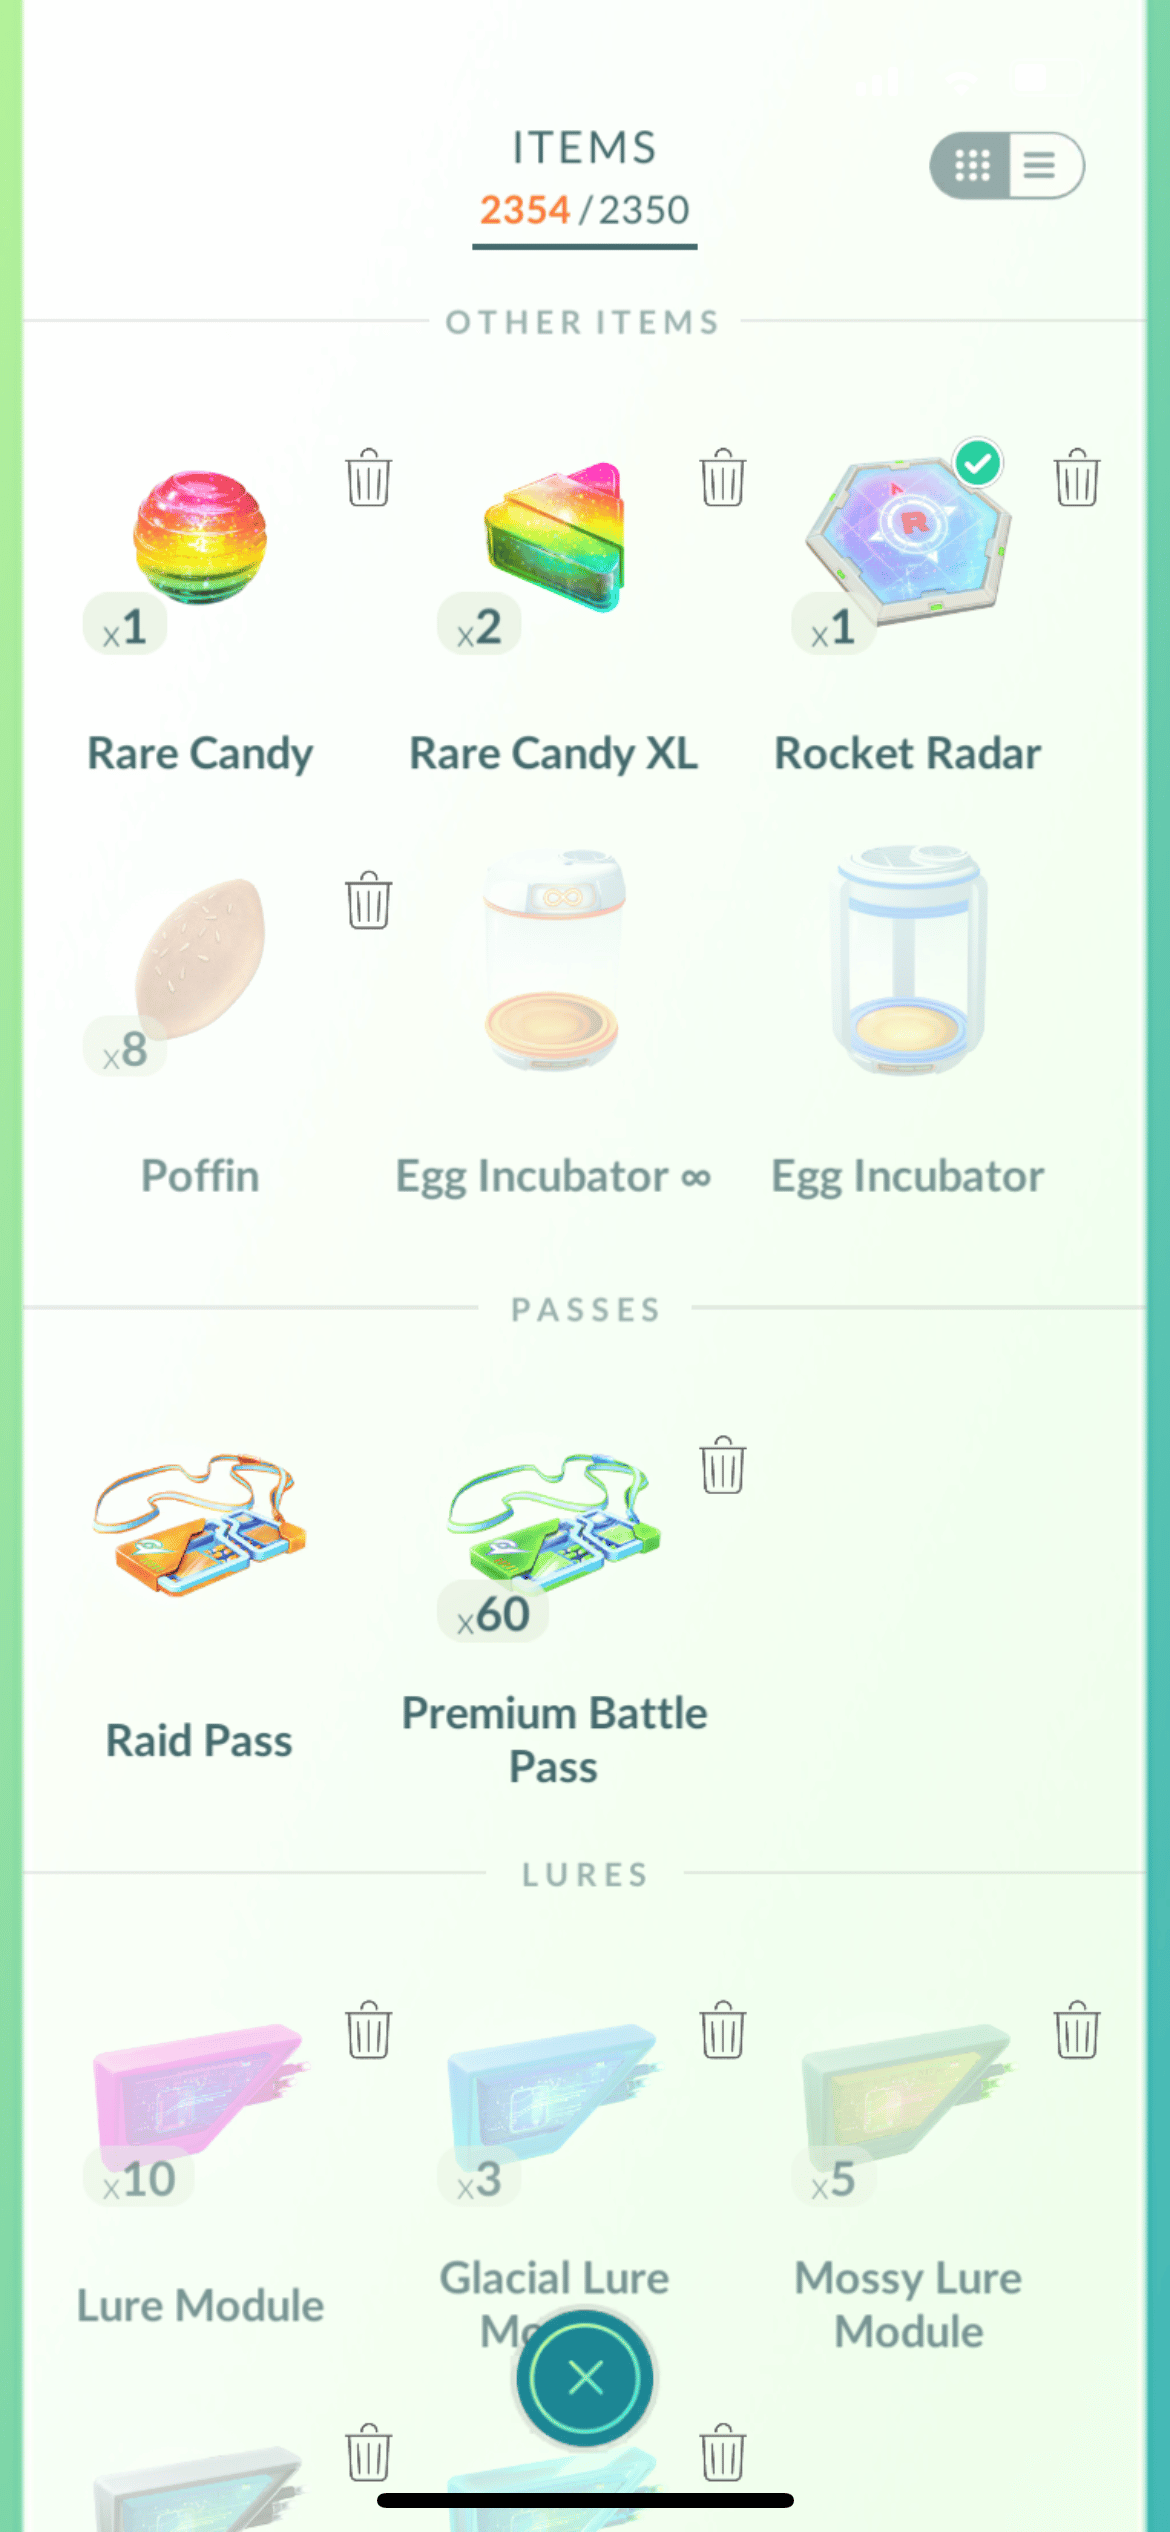 Pokémon Go Updates Item Inventory Ui And Increases Storage Space